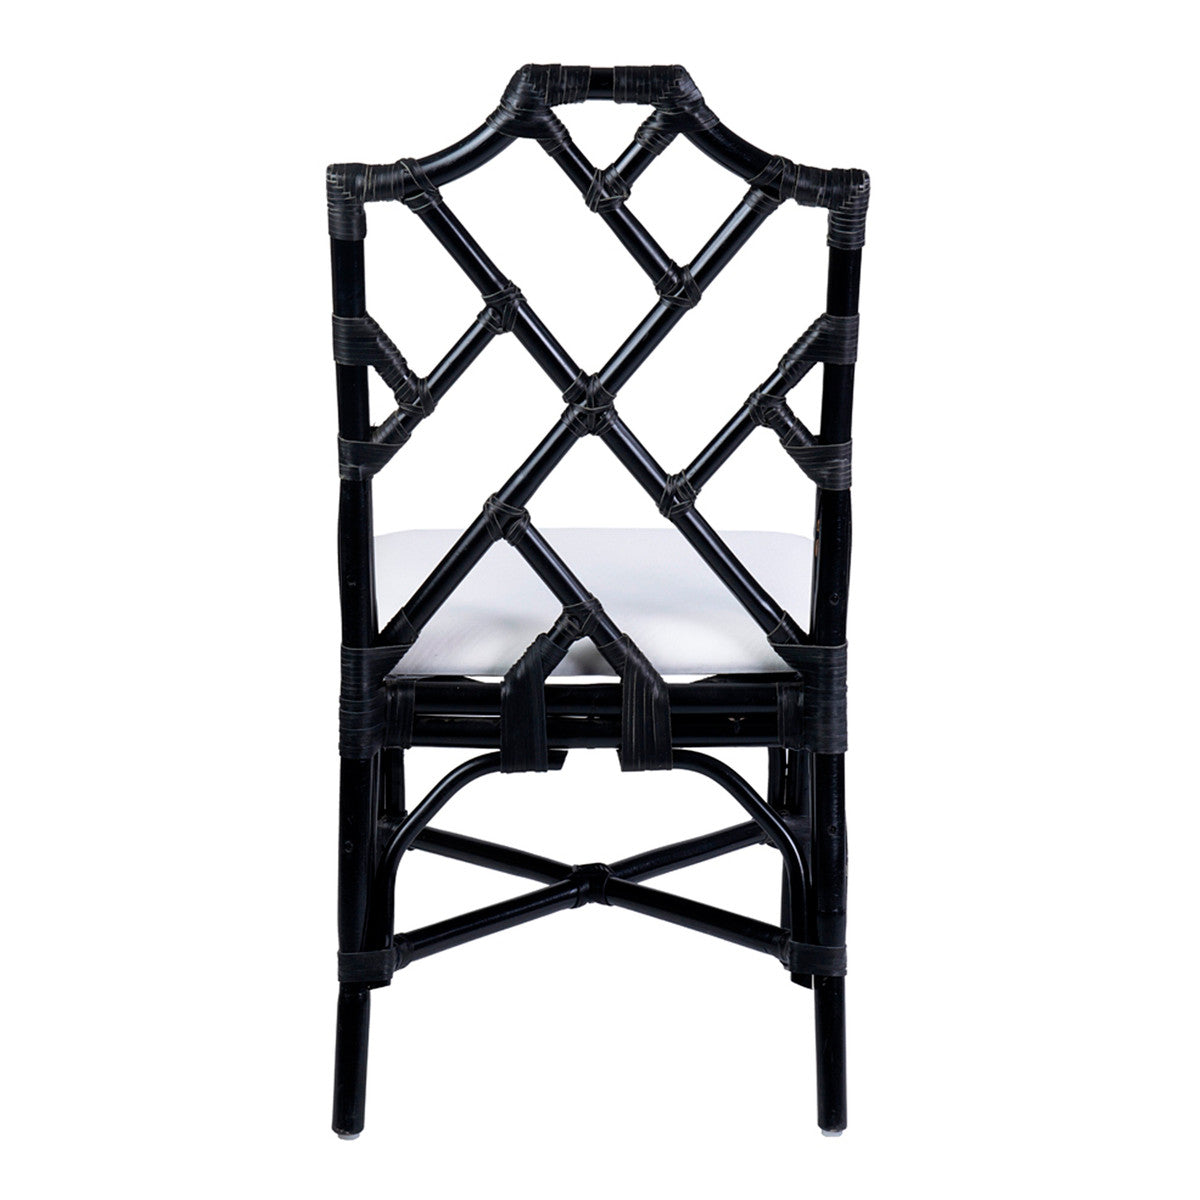 EMERY CHIPPENDALE RATTAN SIDE CHAIRS, SET OF 2 (PRICE IS PER PAIR)